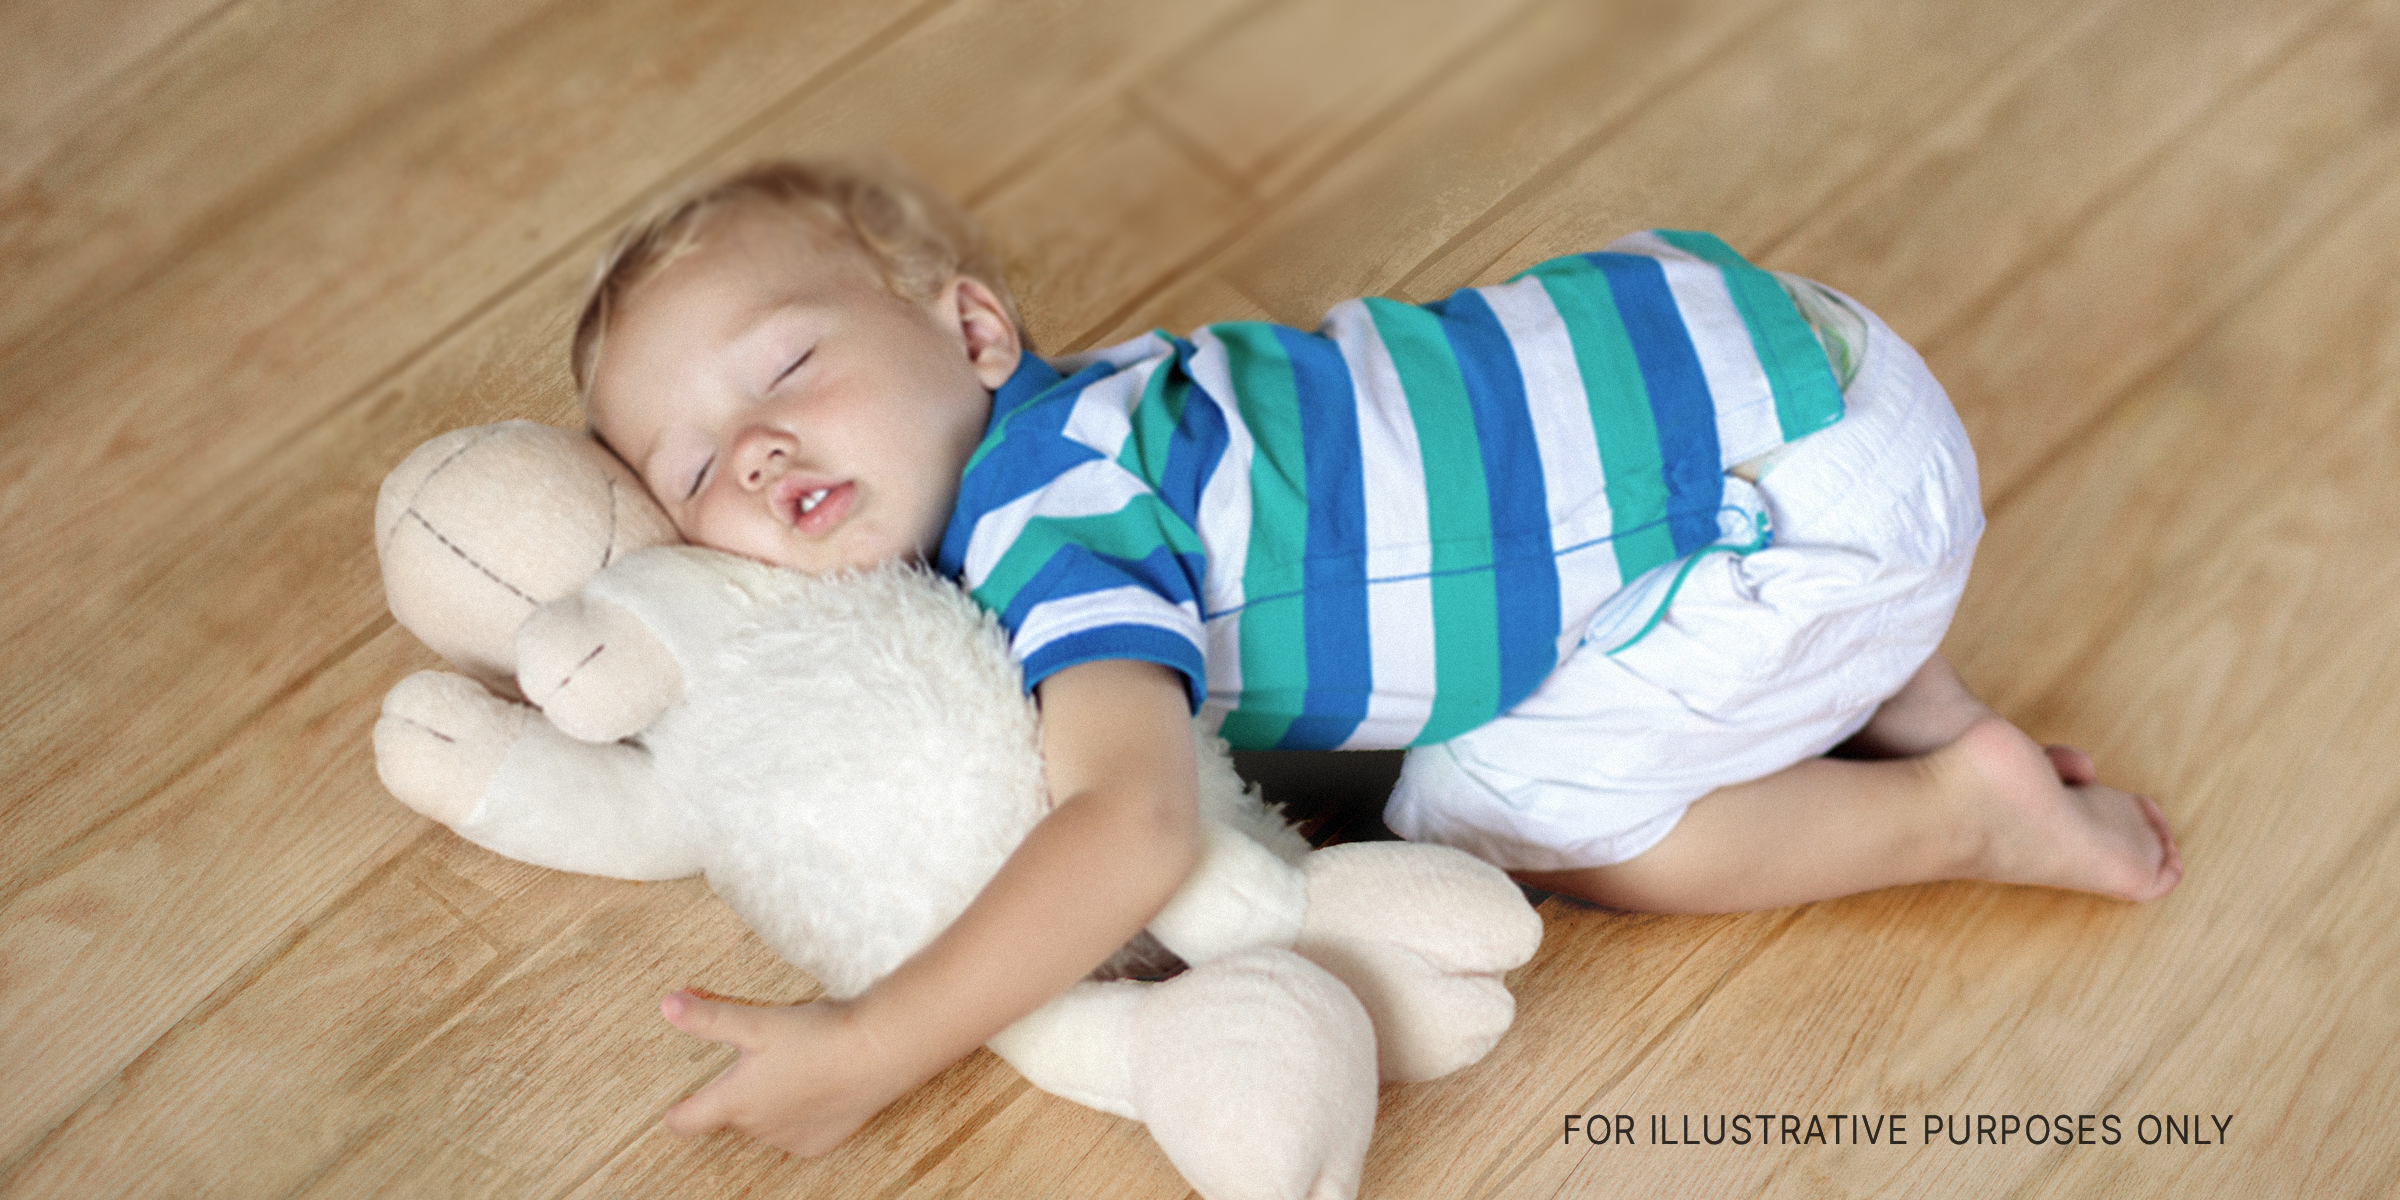 Toddler on the floor with teddy bear | Source: Shutterstock